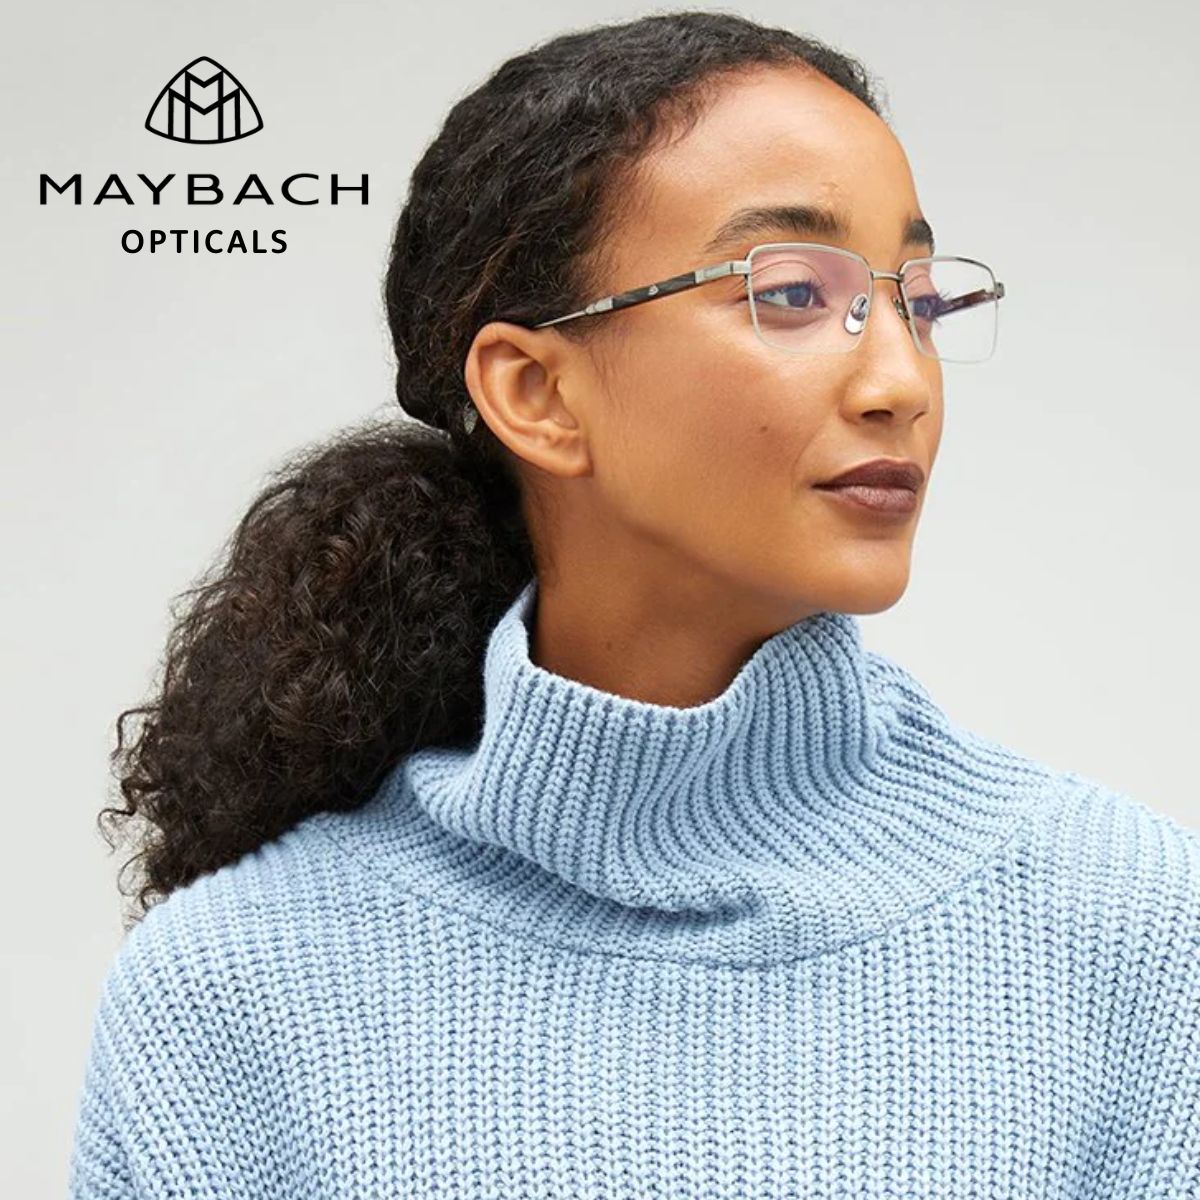 "Explore luxury Maybach eyewear at Optorium. Discover fashionable, customizable glasses frames for men and women online."